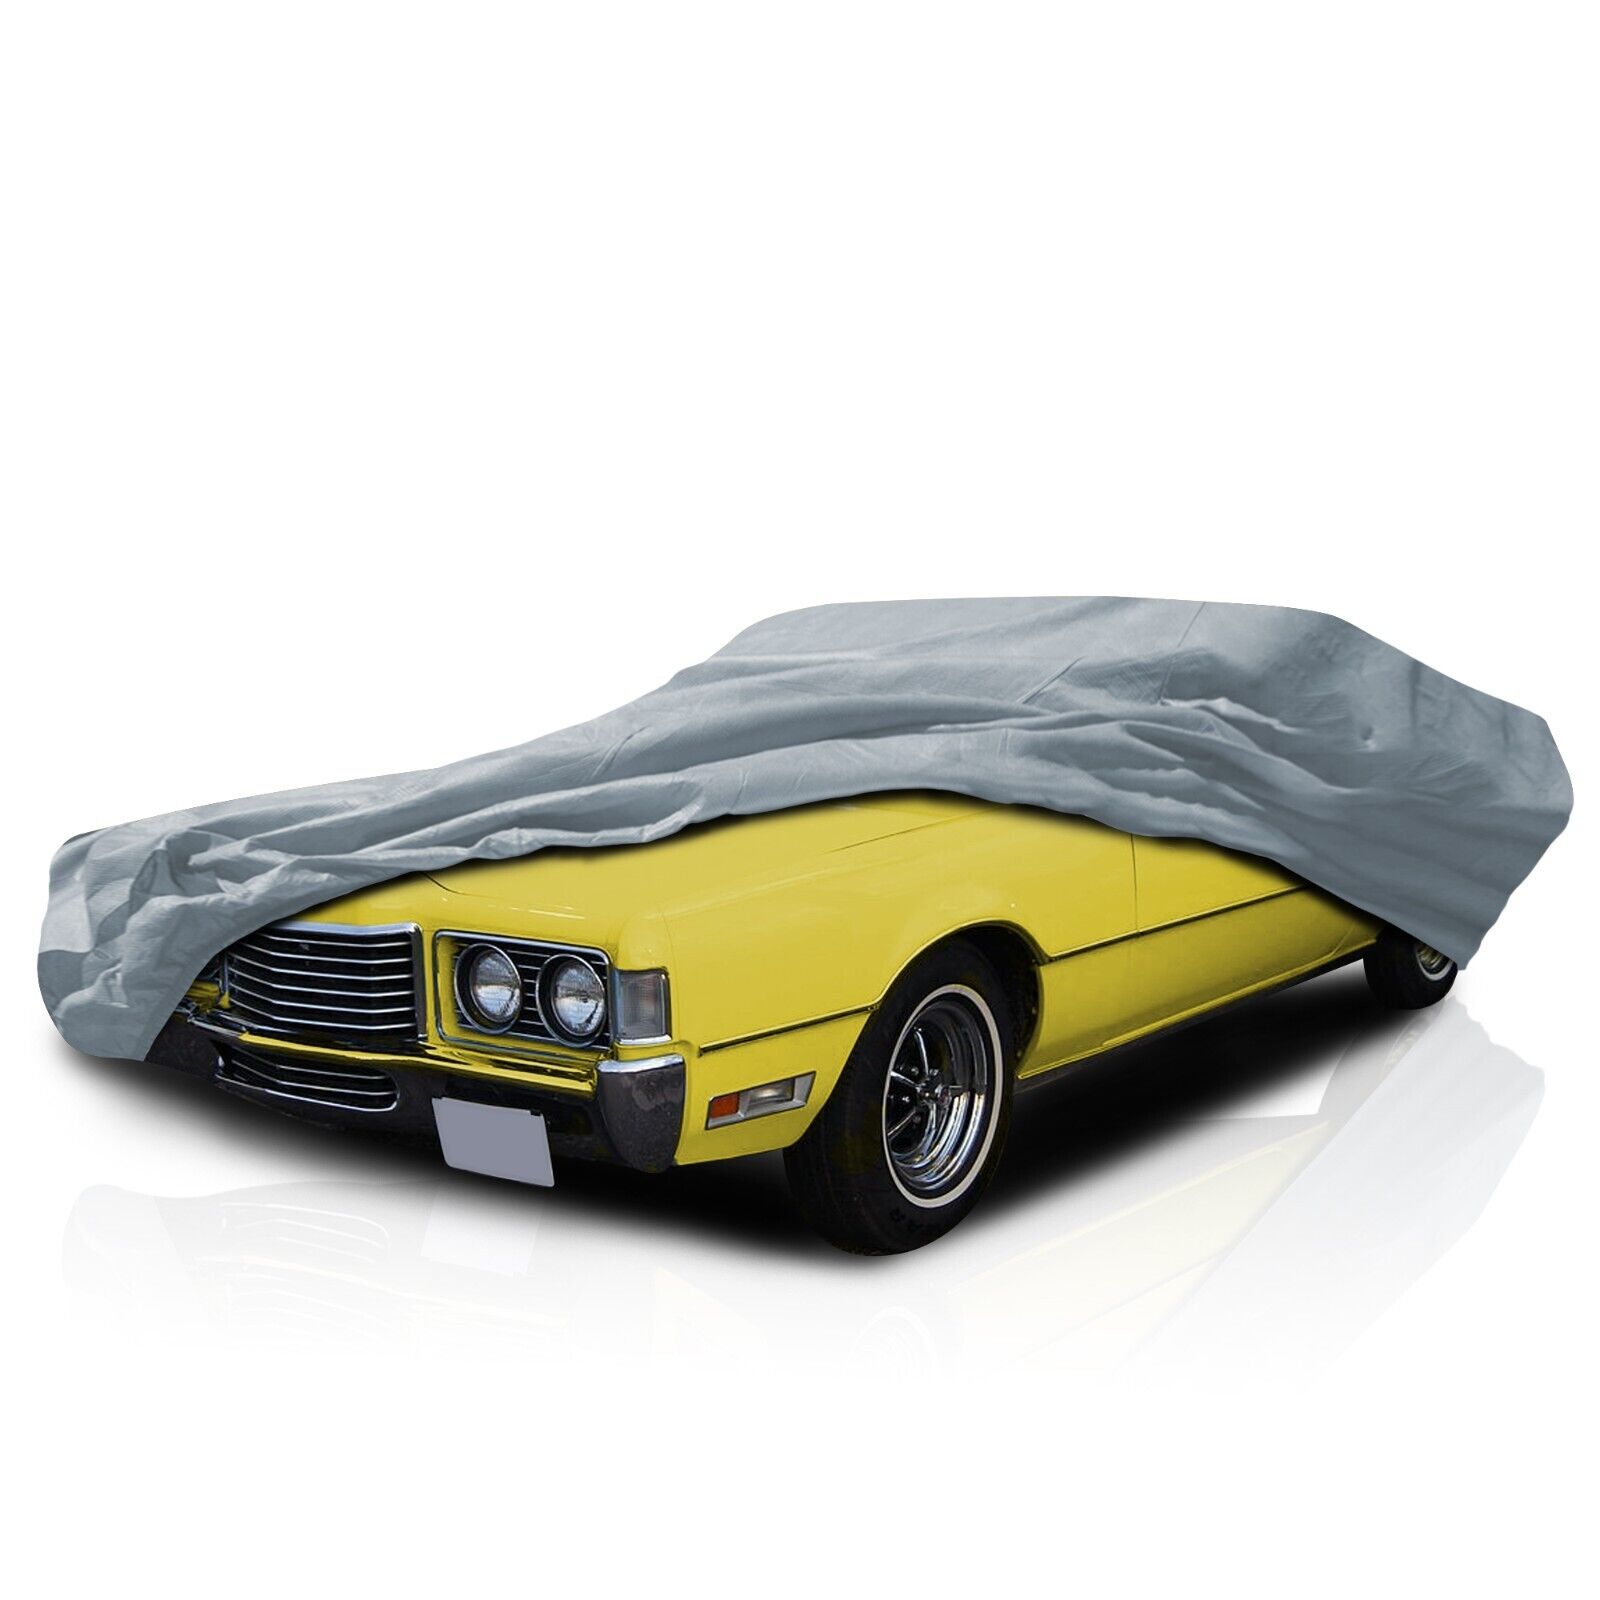 [CCT] 5 Layer Car Cover For Limousine 26 feet long